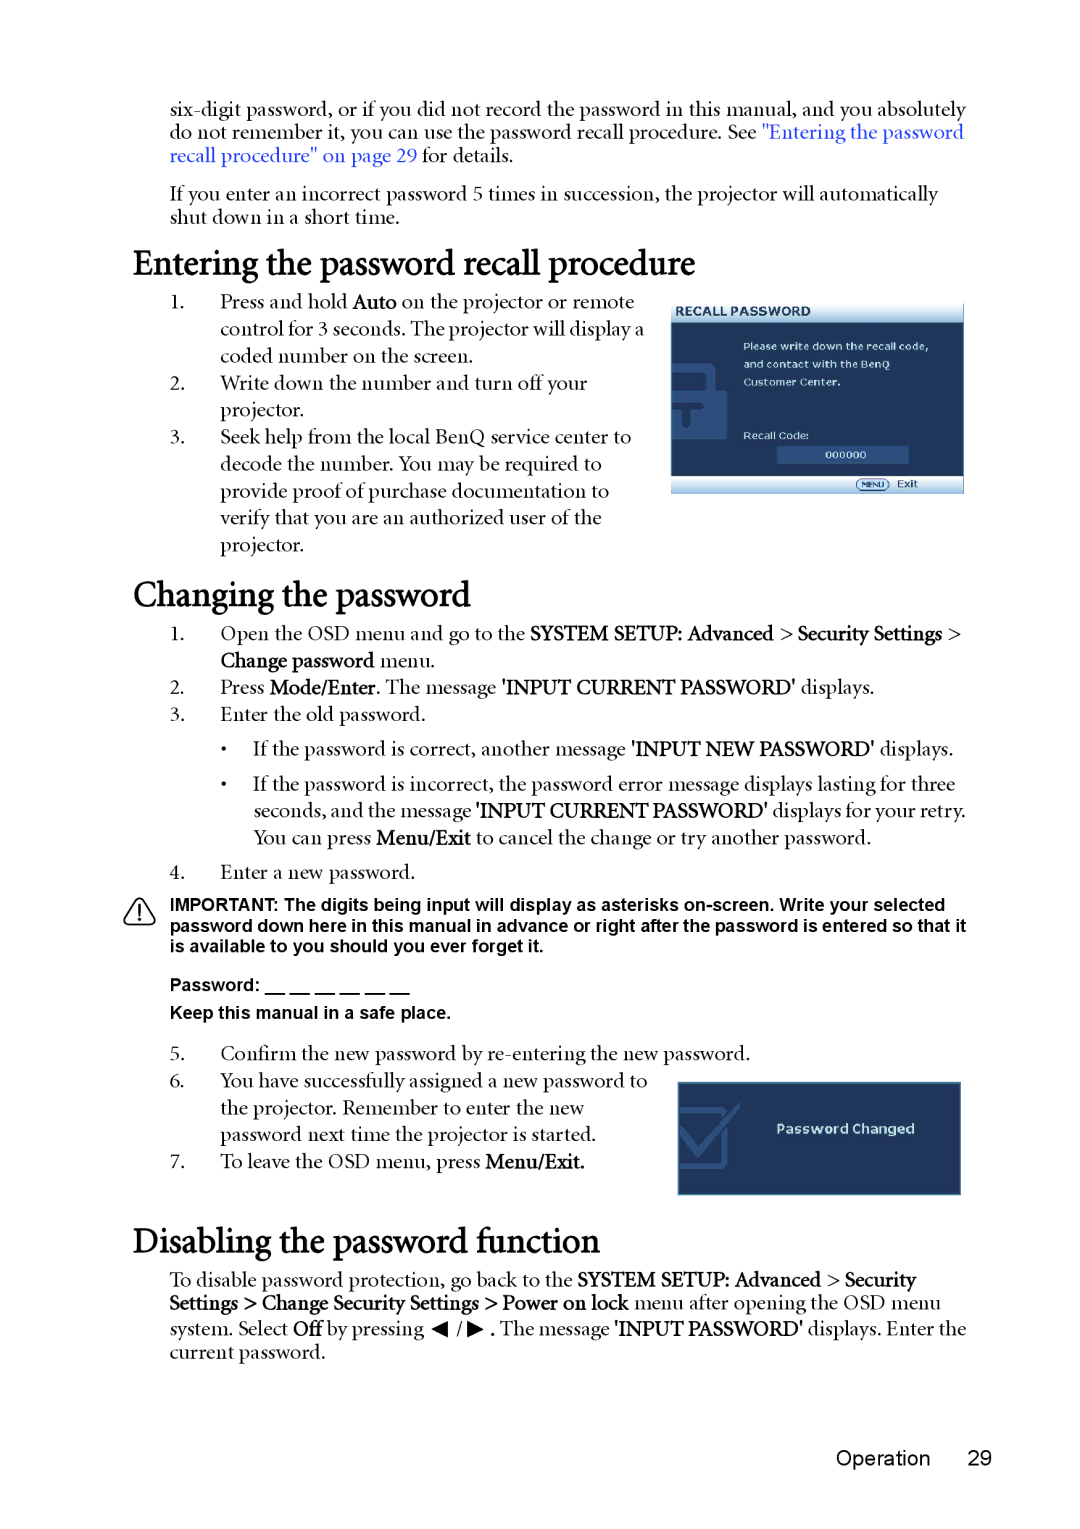 BenQ MW512 user manual Entering the password recall procedure, Changing the password, Disabling the password function 